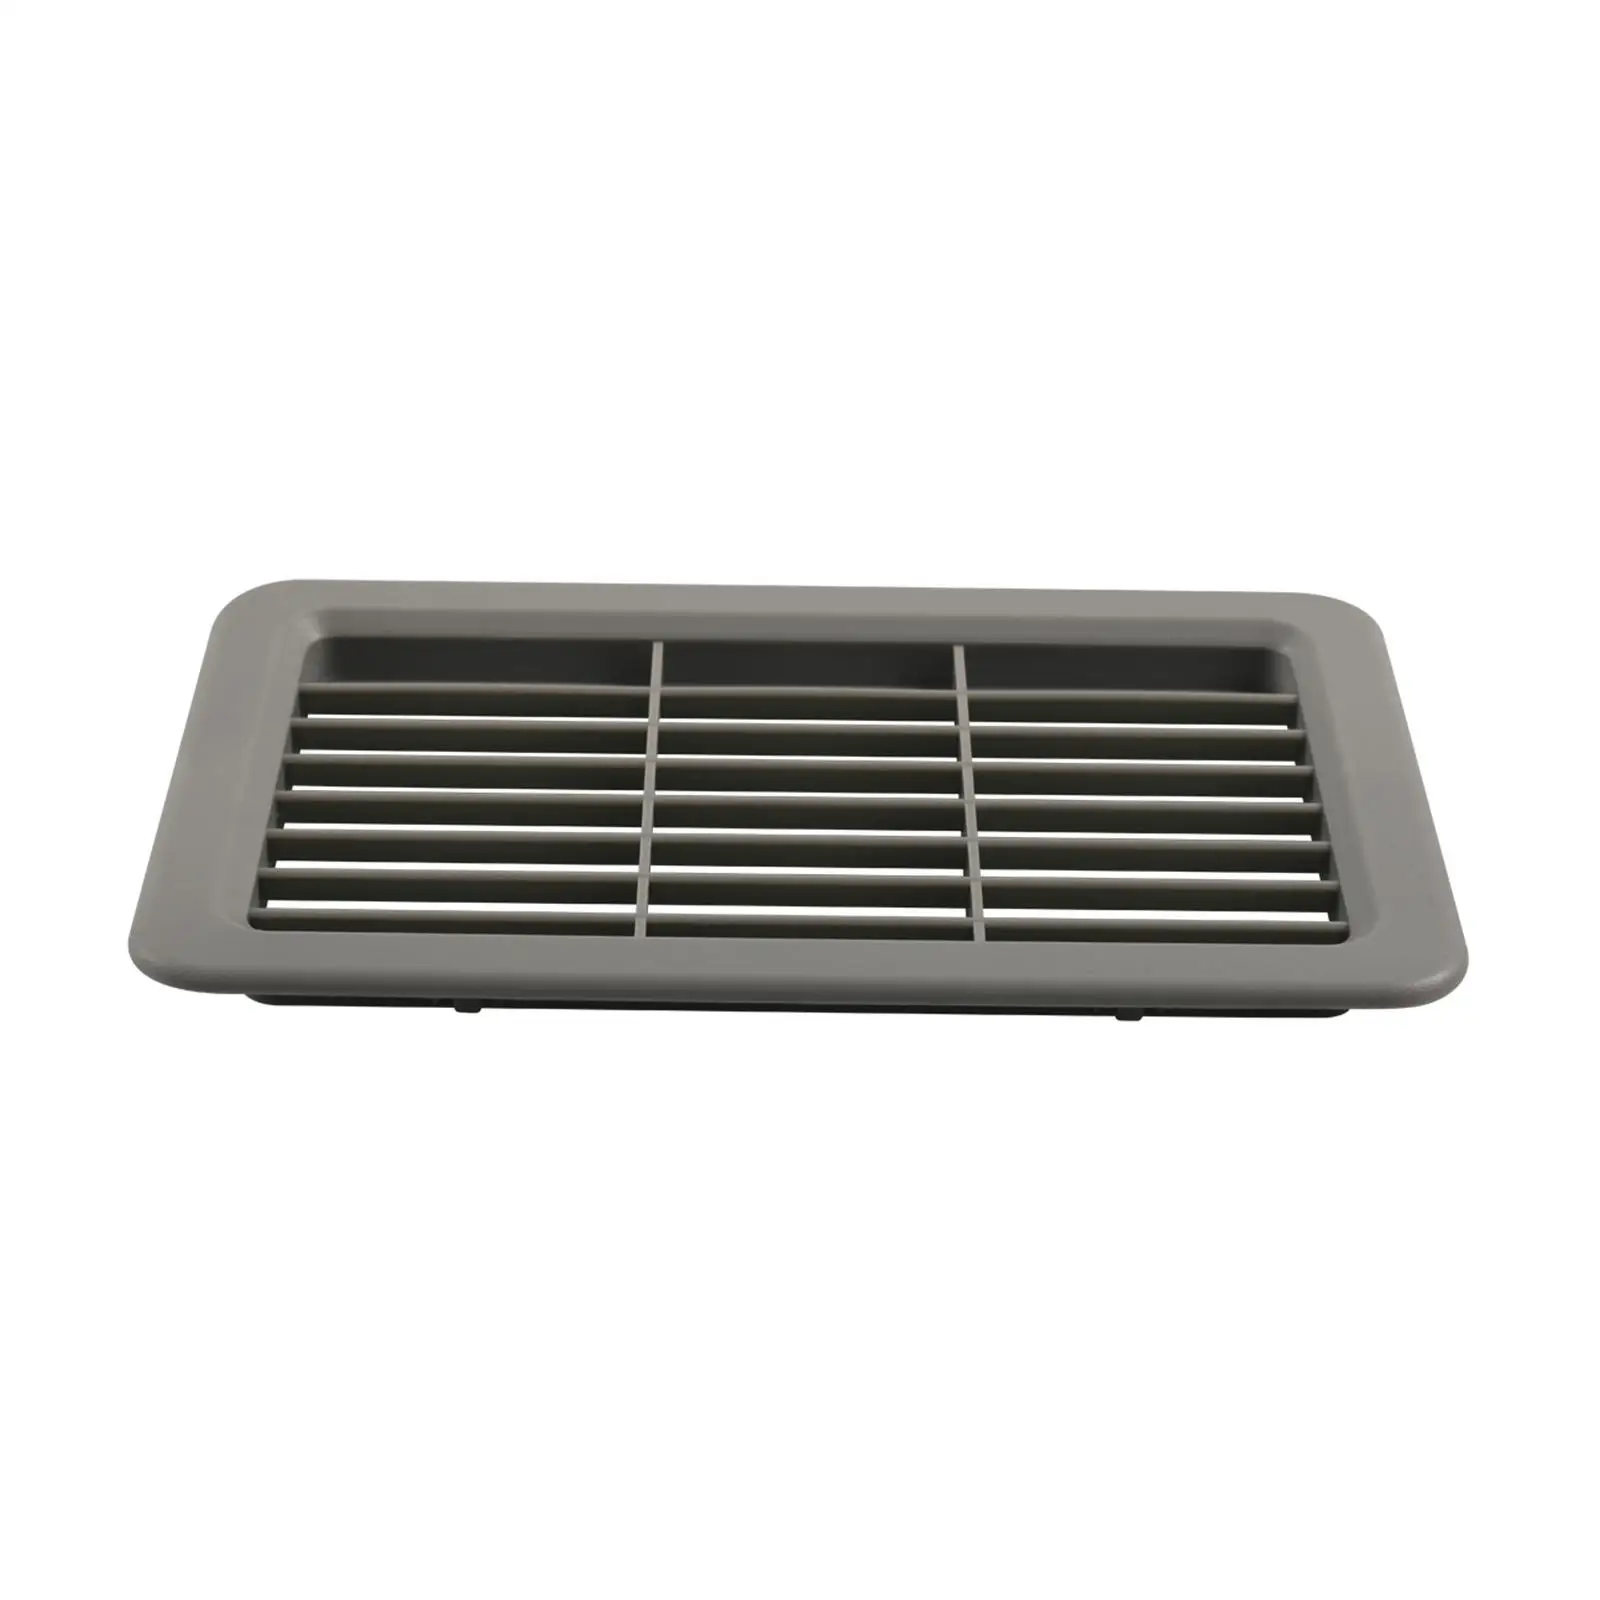 Air Vent Grille Replaces Stable Performance Supply Snap on Air Vent Outlet Deflector for Motorhome Trailer